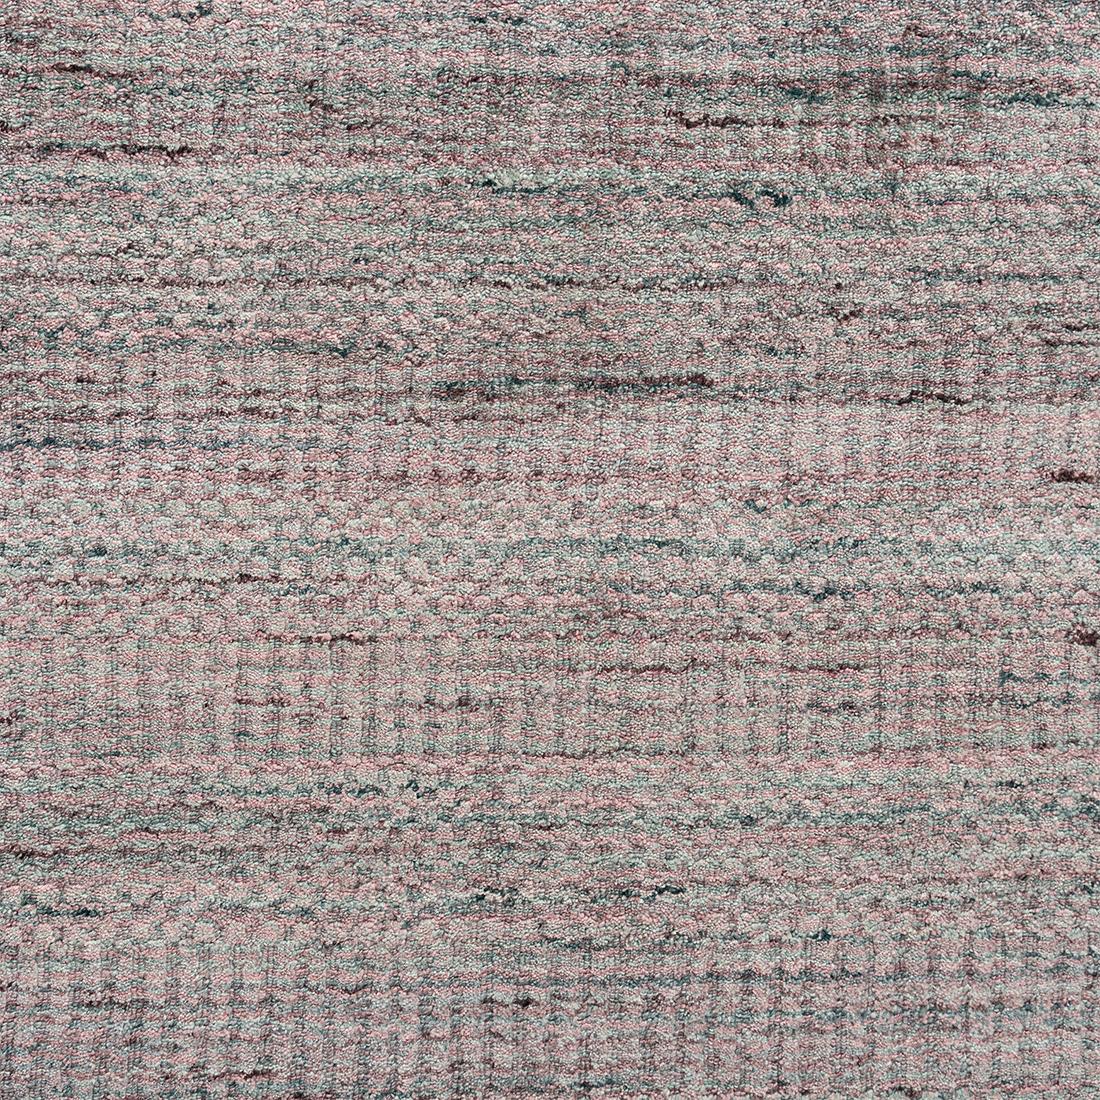 Hand-Woven Simplicity Comfort Pink Turquoise Contemporary Handwoven Rug  9'2 x 12' For Sale